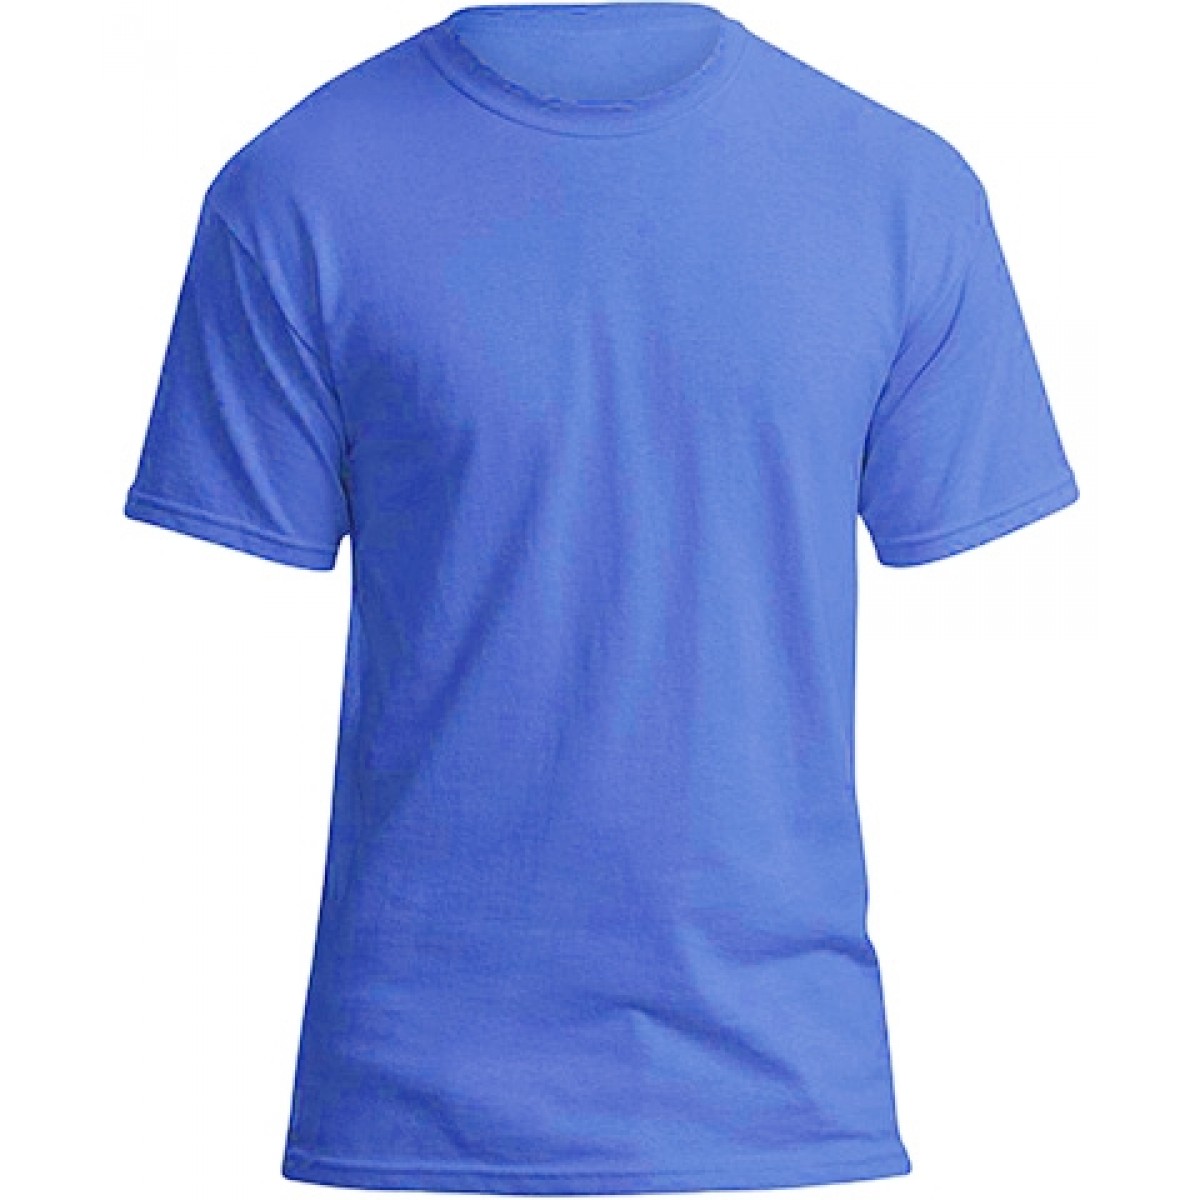 Colored T Shirts